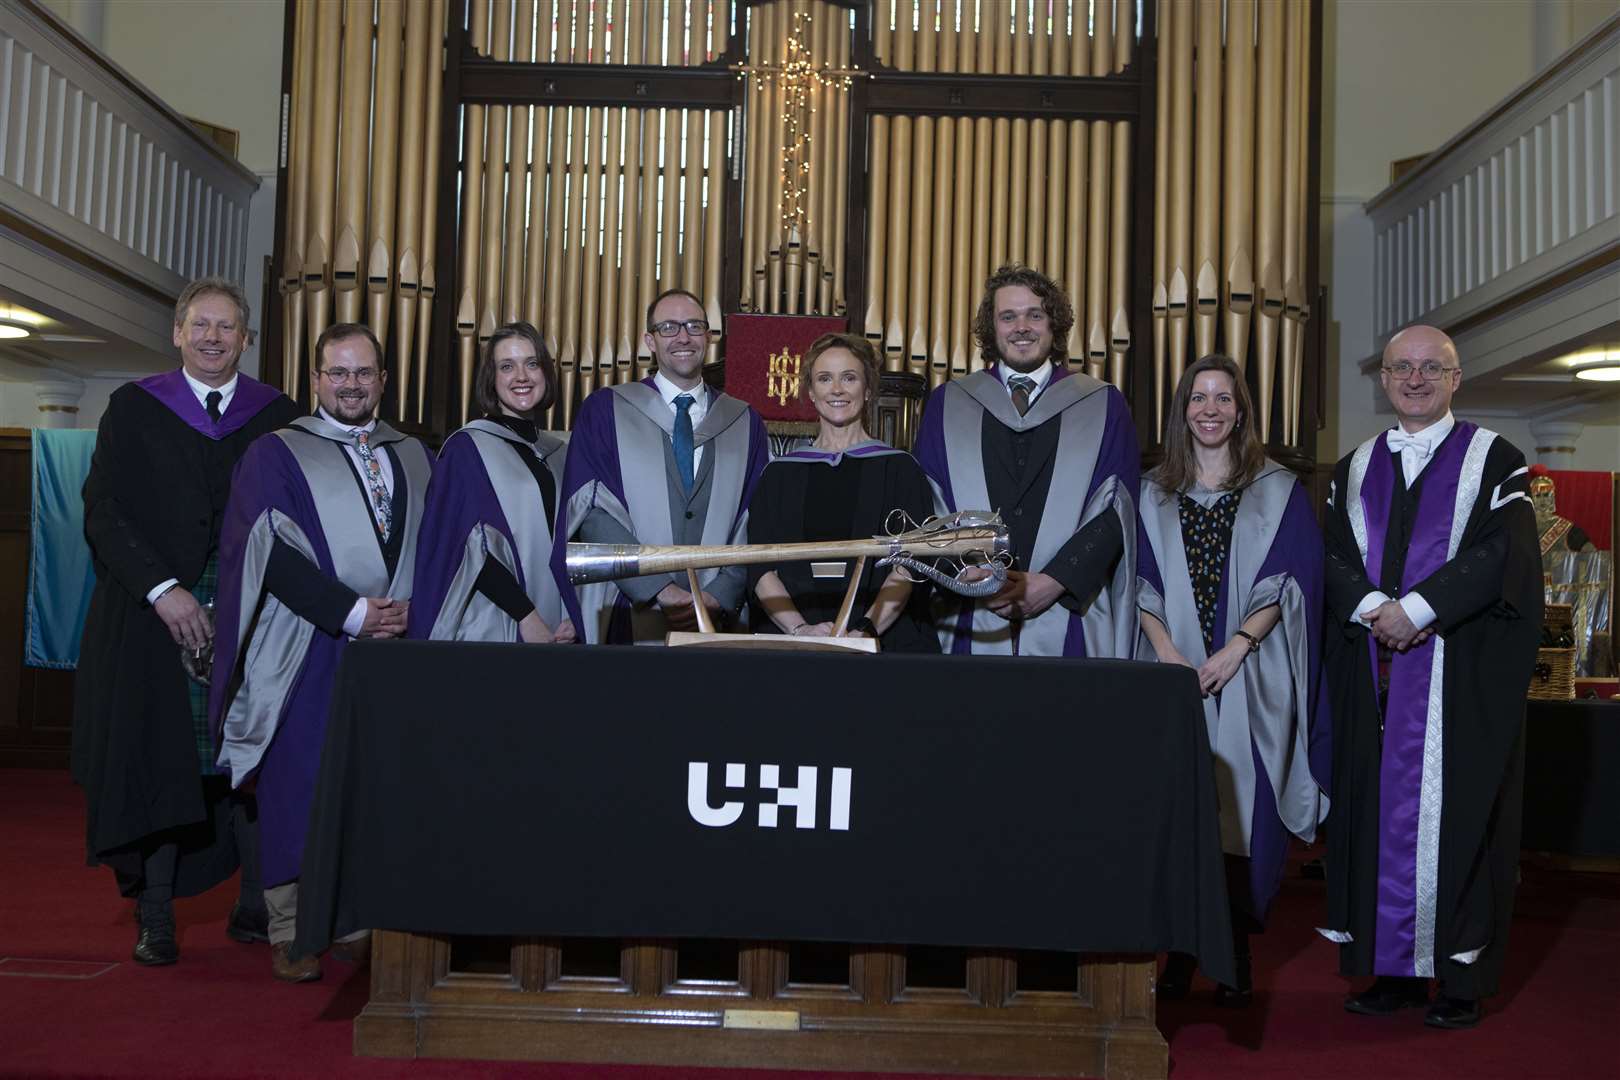 UHI North Highland principal Debbie Murray (centre) with Stuart Gibb (left), Neil Simco, UHI vice principal research and impact (right), and some of the PhD graduates.